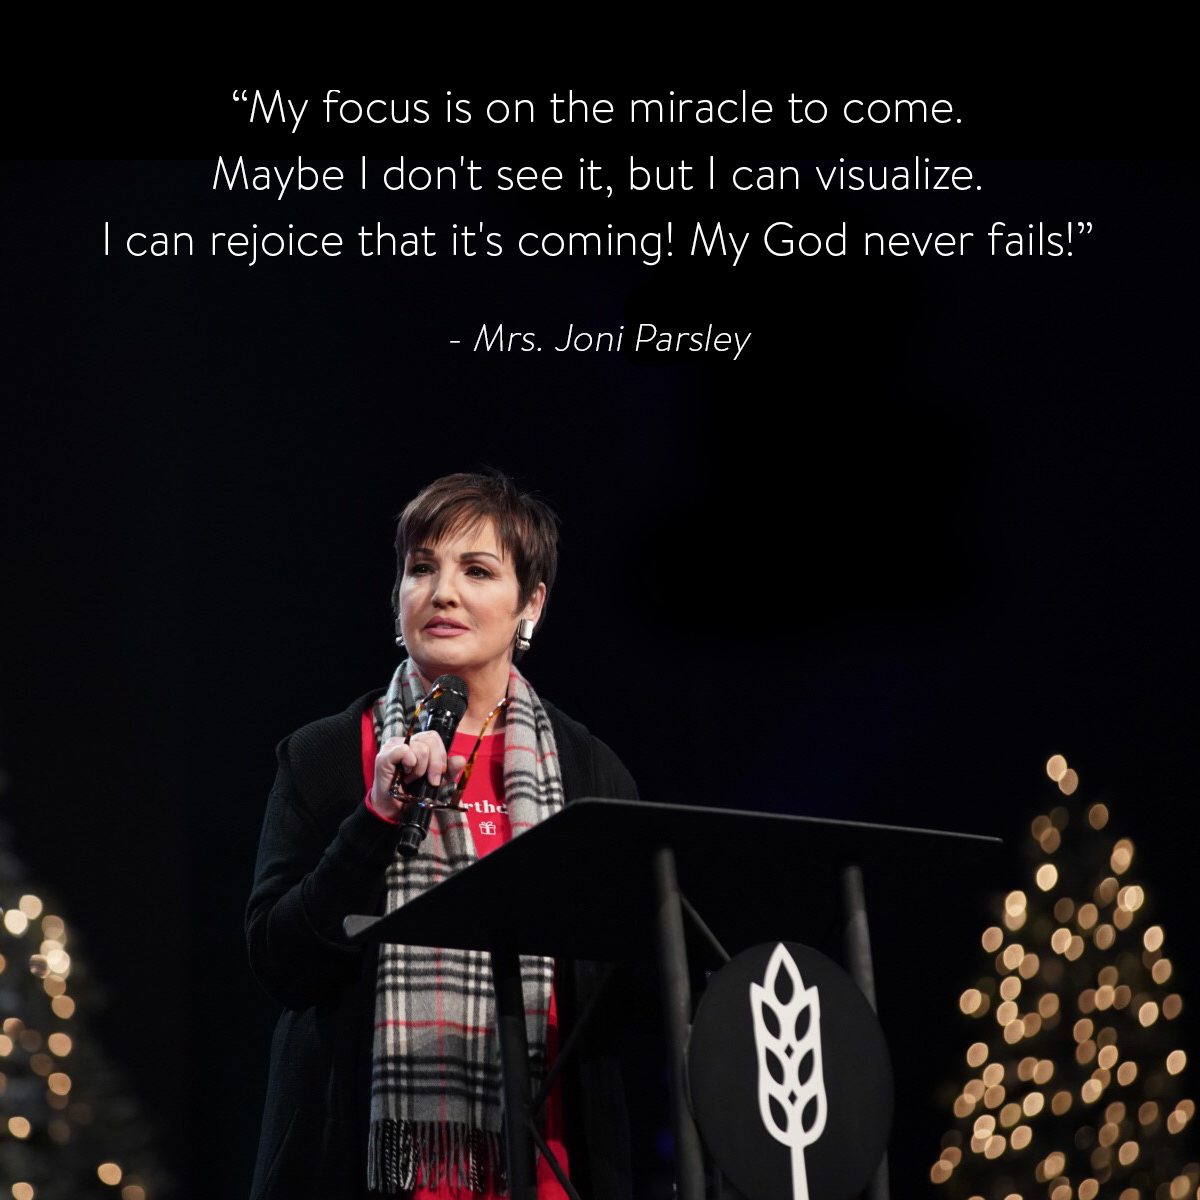 “My focus is on the miracle to come. Maybe I don't see it, but I can visualize. I can rejoice that it's coming! My God never fails” – Mrs. Joni Parsley